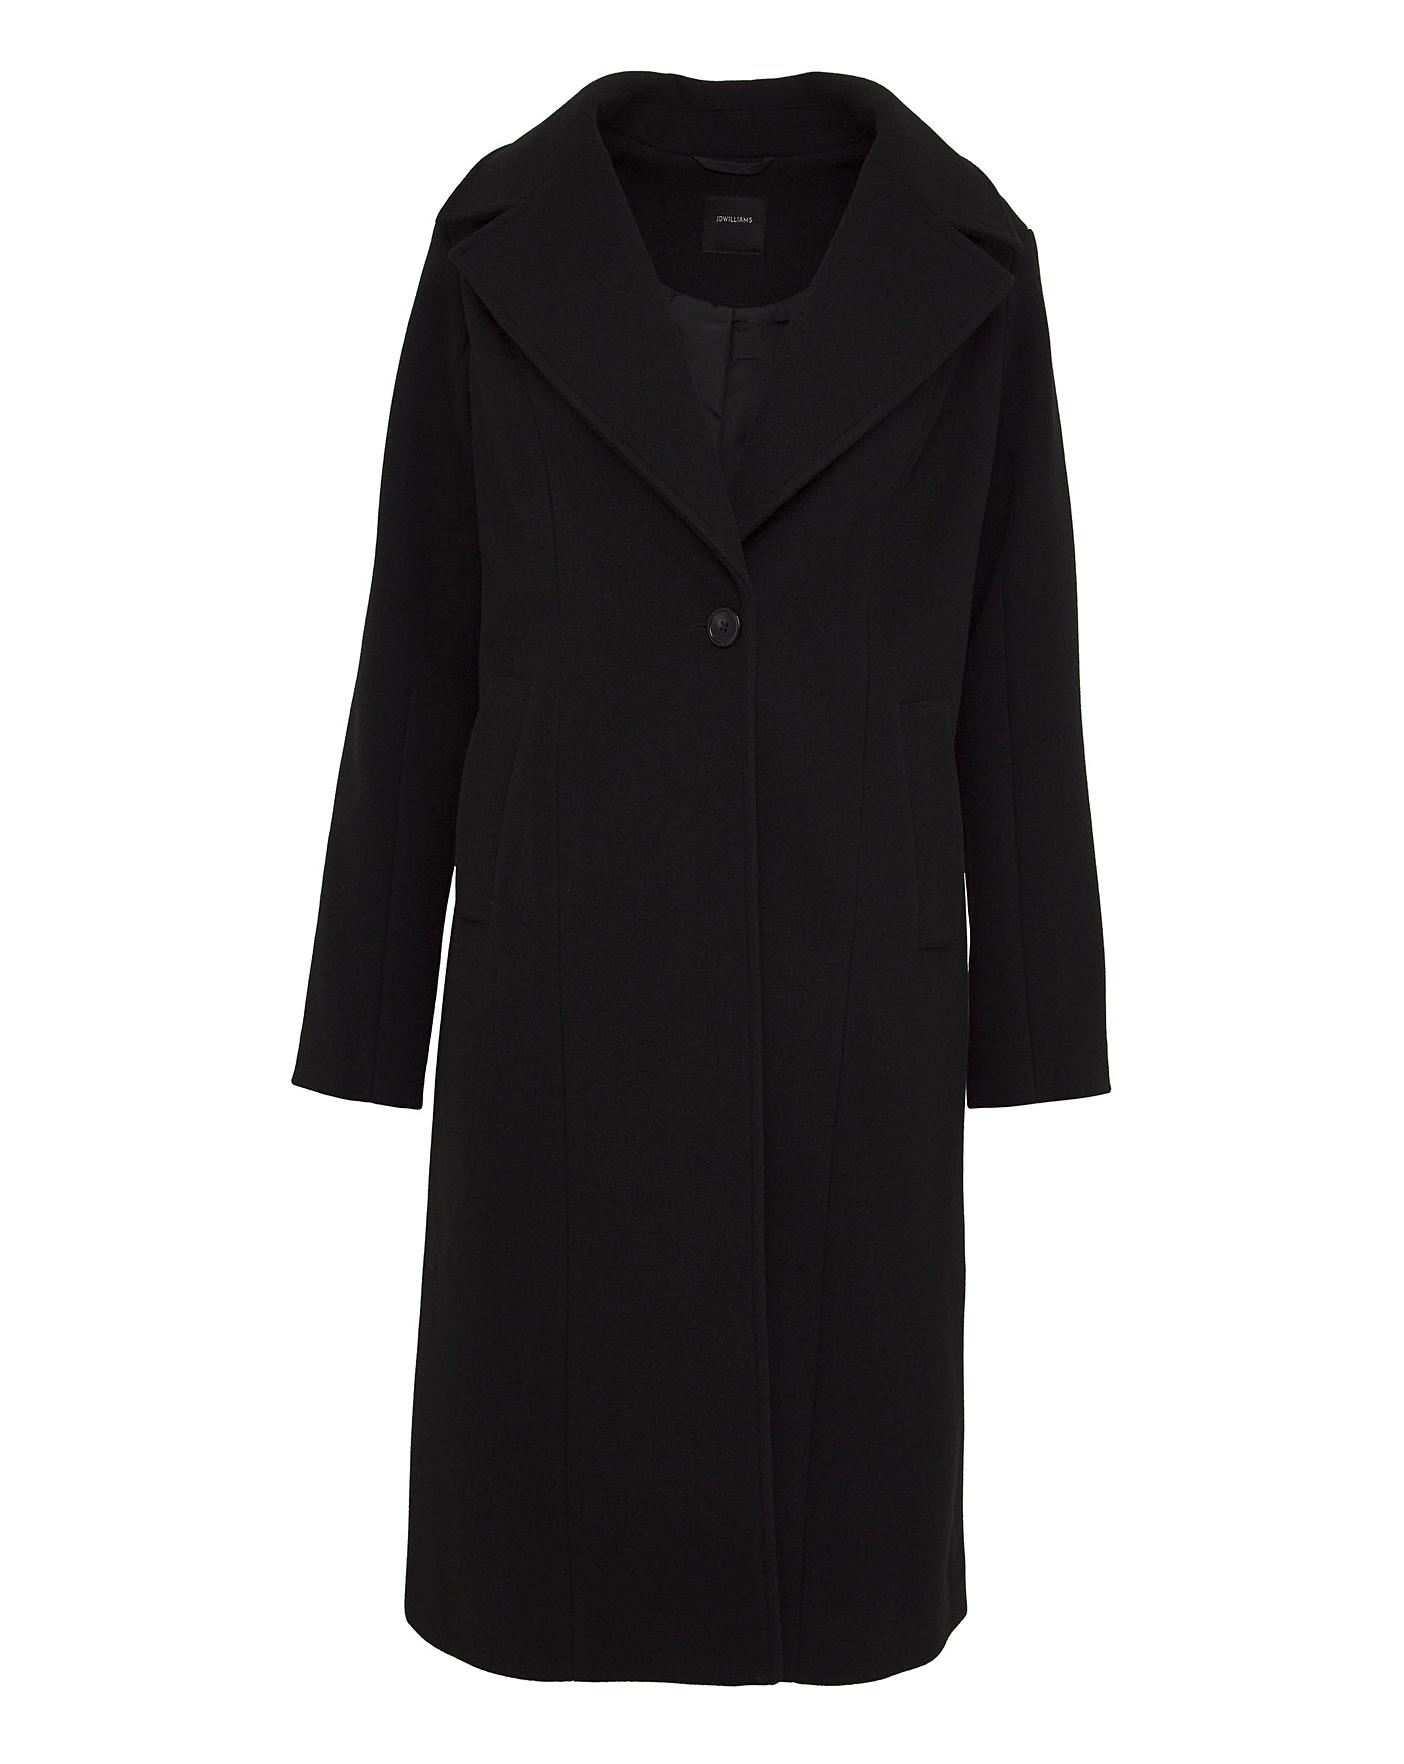 Black Lined Single Breasted Coat | J D Williams